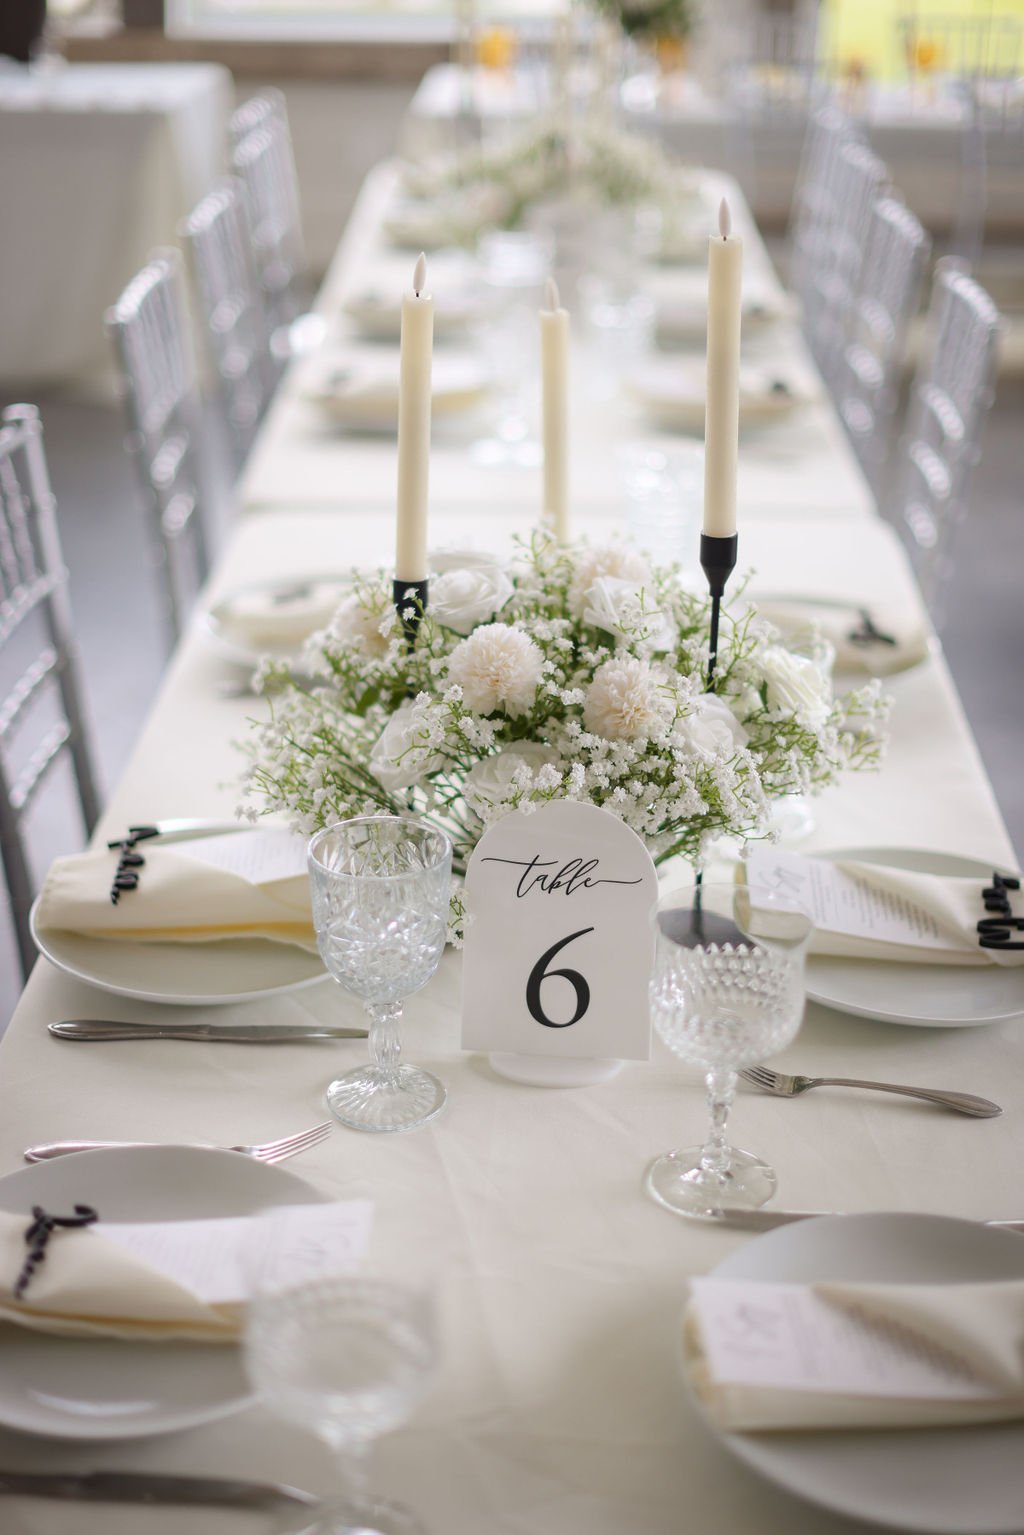 Gorgeous wedding table setting at silver knot.jpg